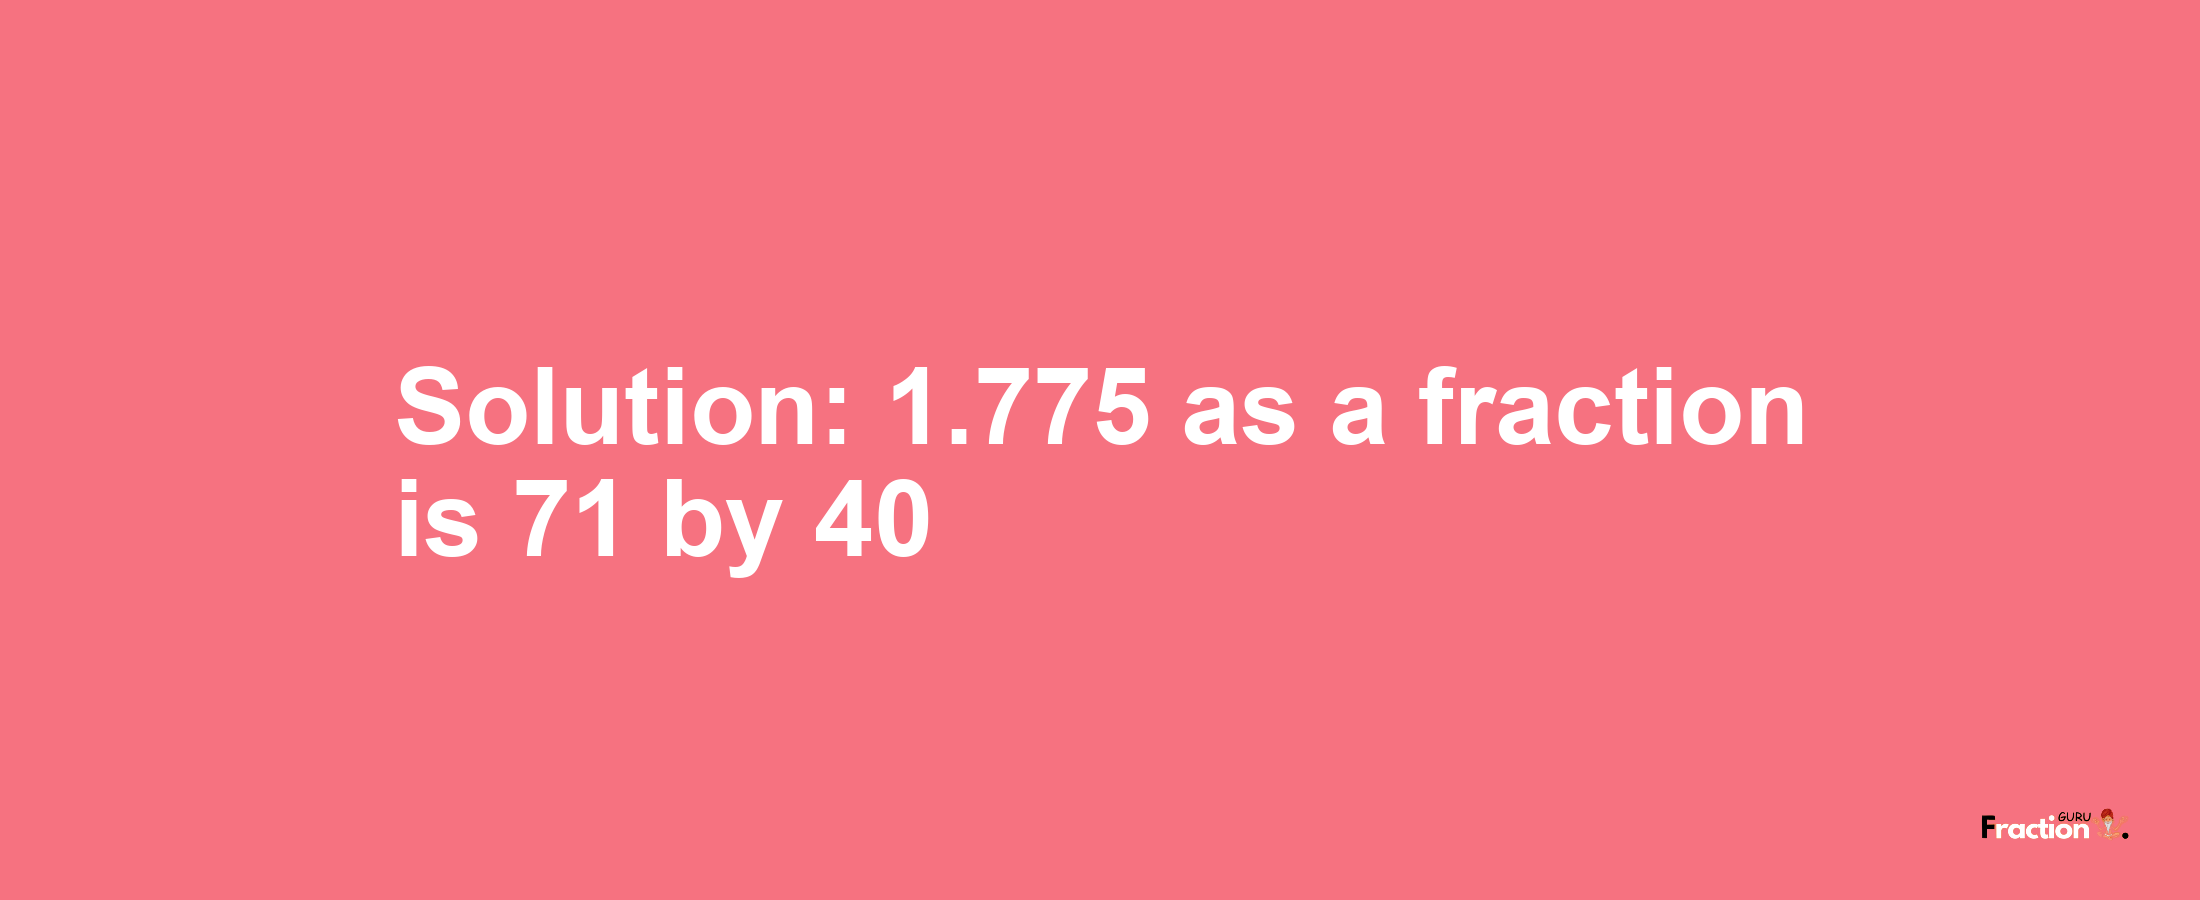 Solution:1.775 as a fraction is 71/40